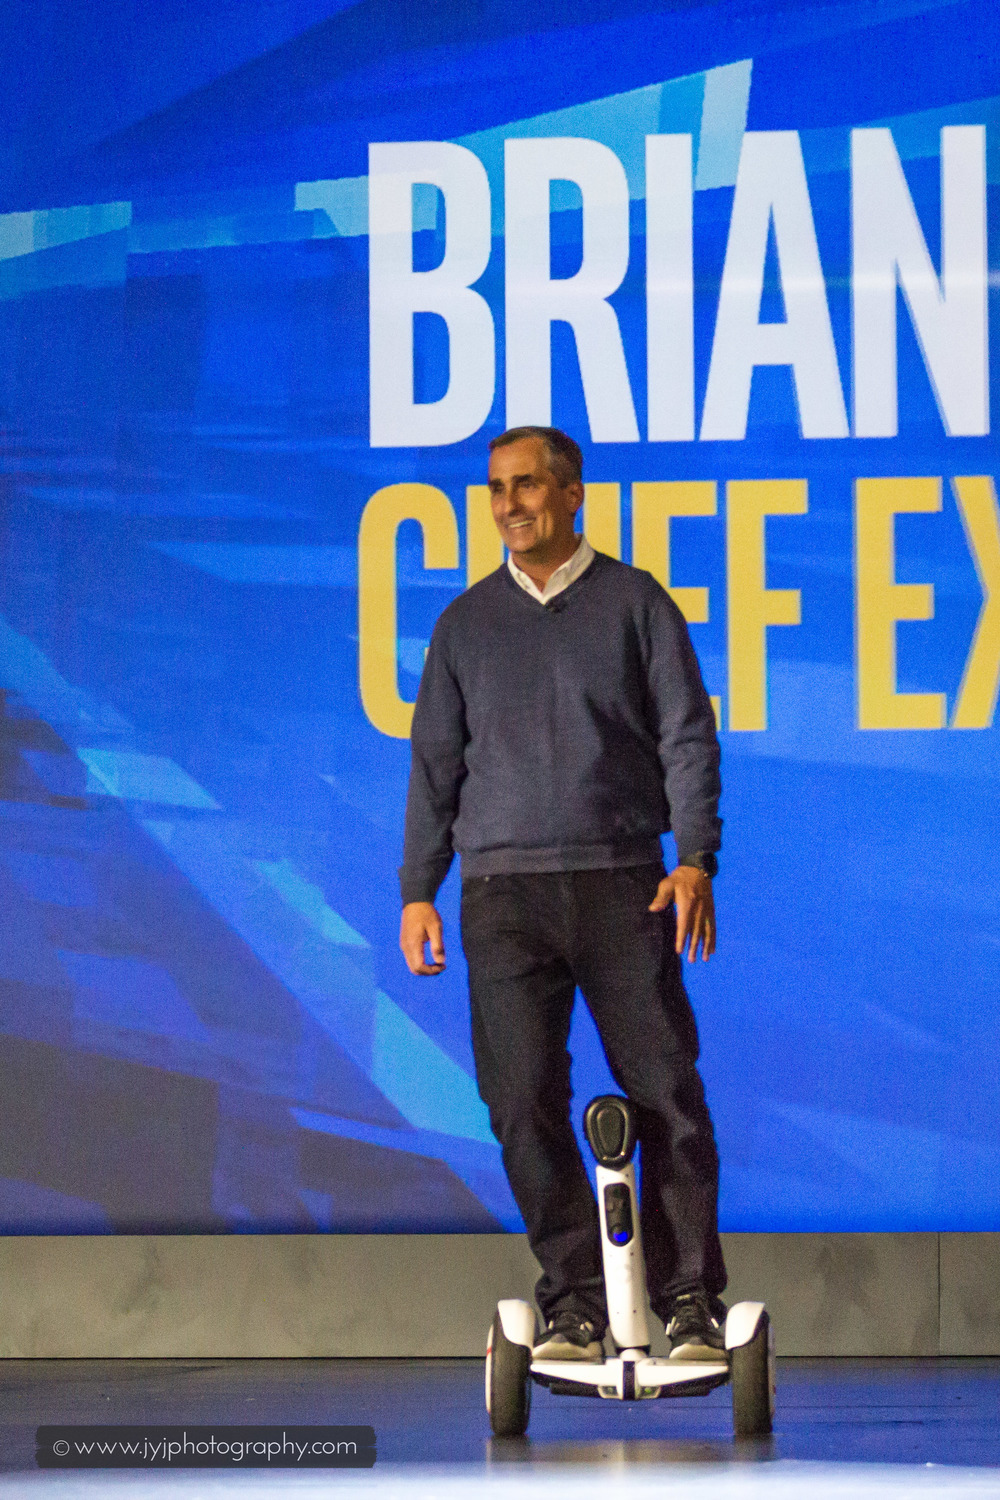  Brian Krzanich entering the stage using a Segway 